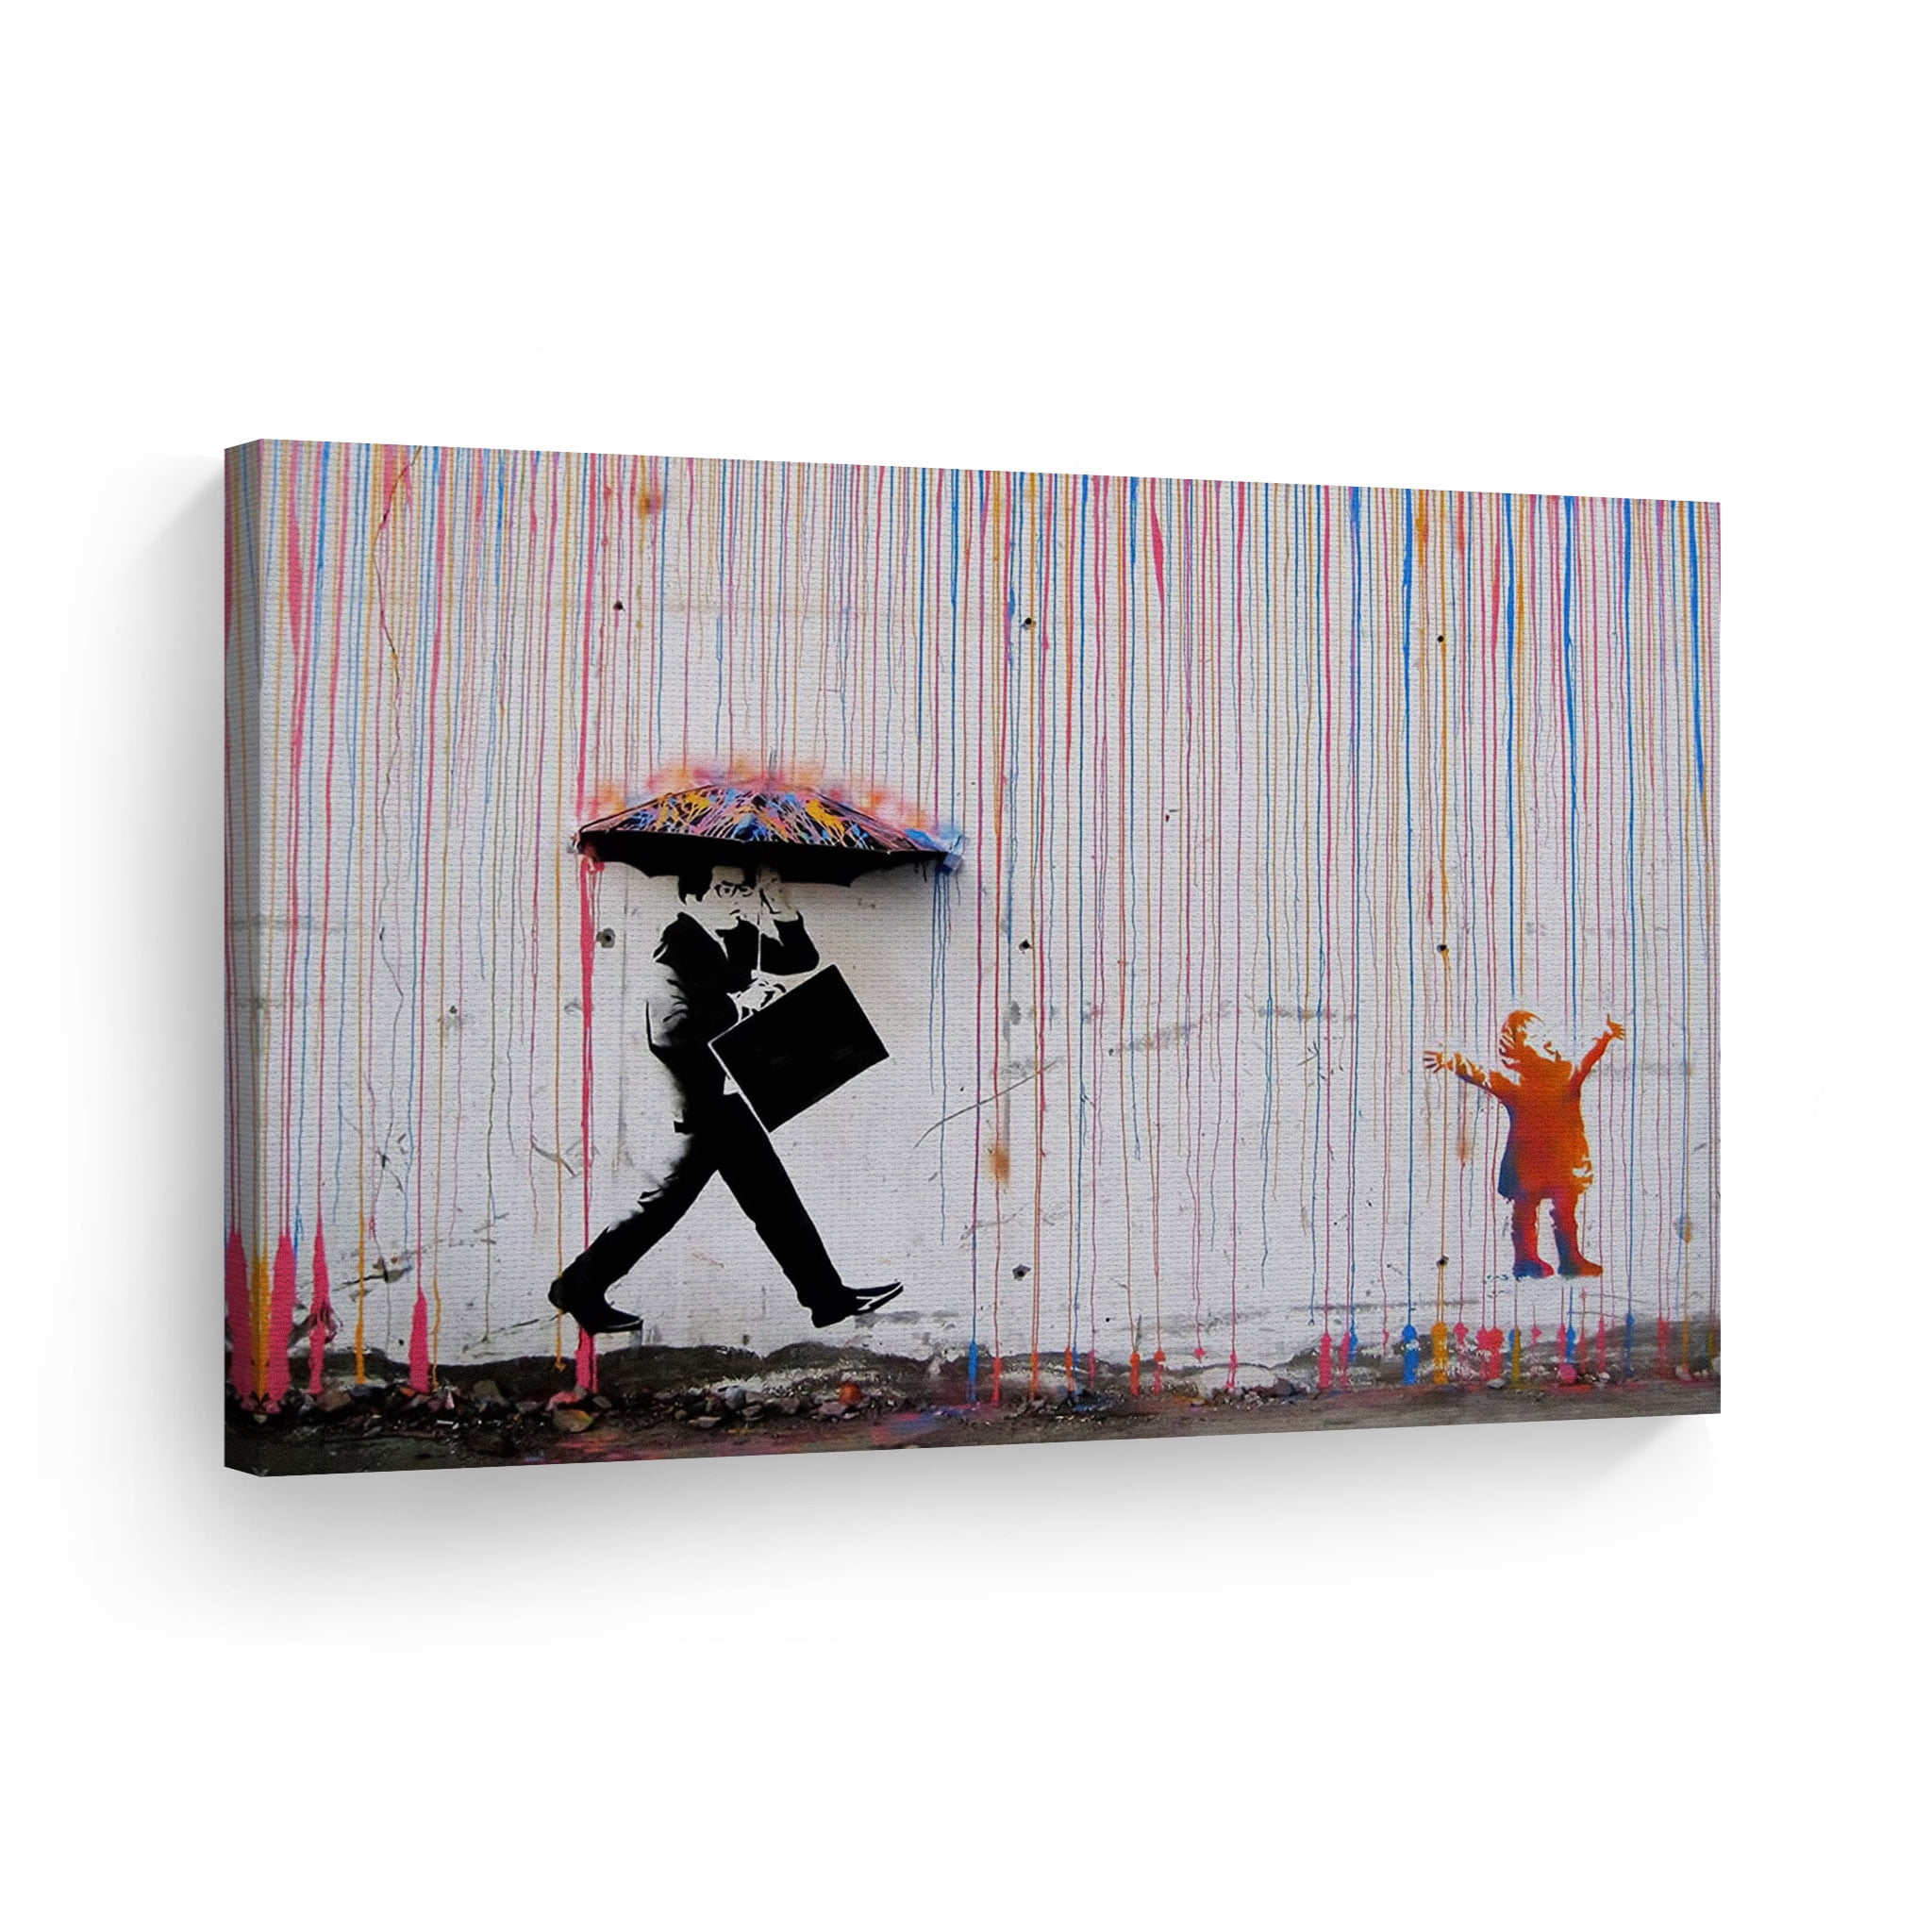 Picture Poster Print Art A0 A1 A2 A3 A4 BANKSY POSTER LIFE IS BEAUTIFUL 1013 